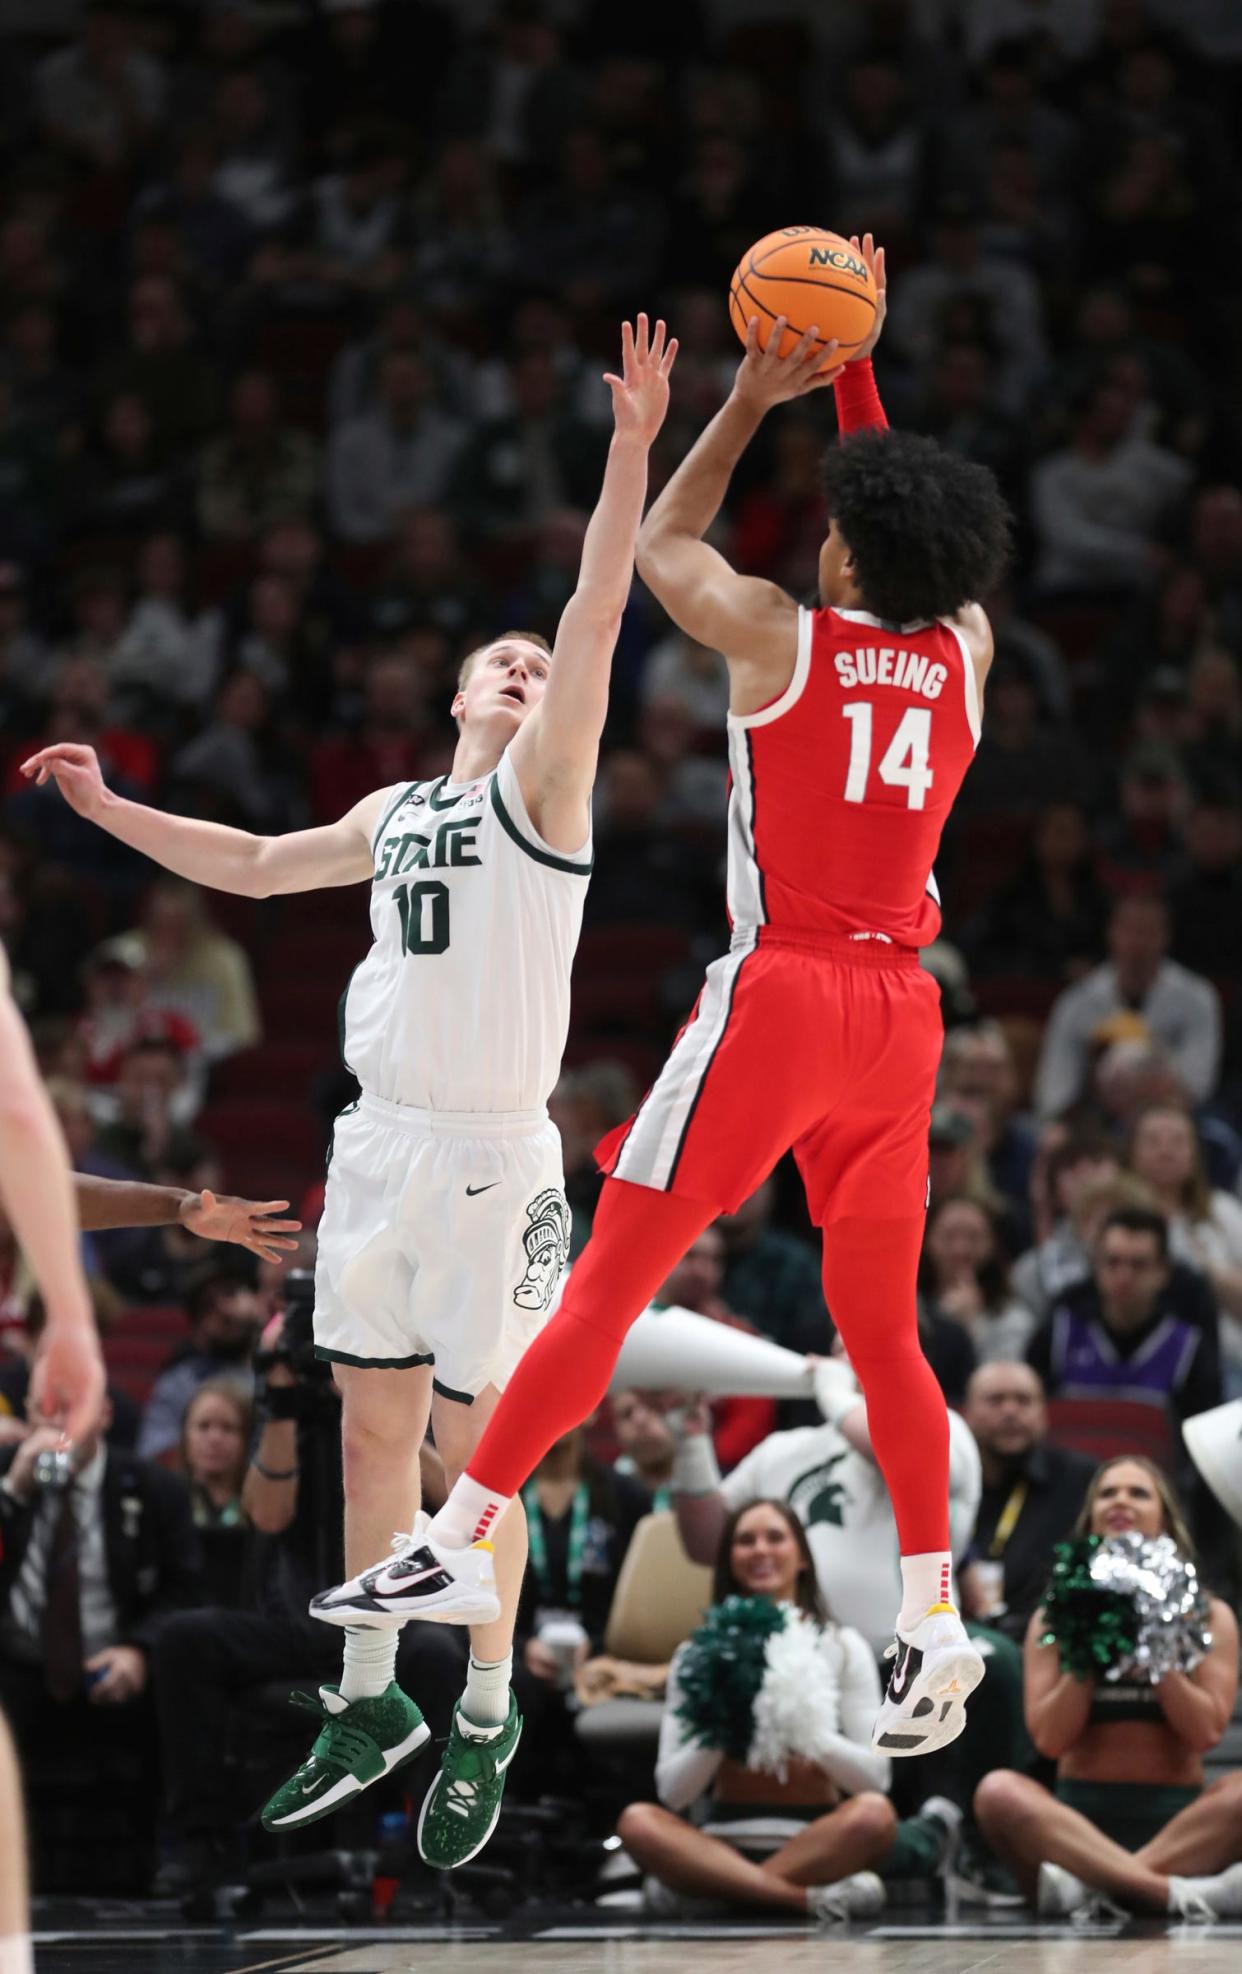 Michigan State Spartans forward Joey Hauser defends Ohio State Buckeyes forward Justice Sueing during the first half of the Big Ten tournament quarterfinals in Chicago, Friday, March 10, 2023.